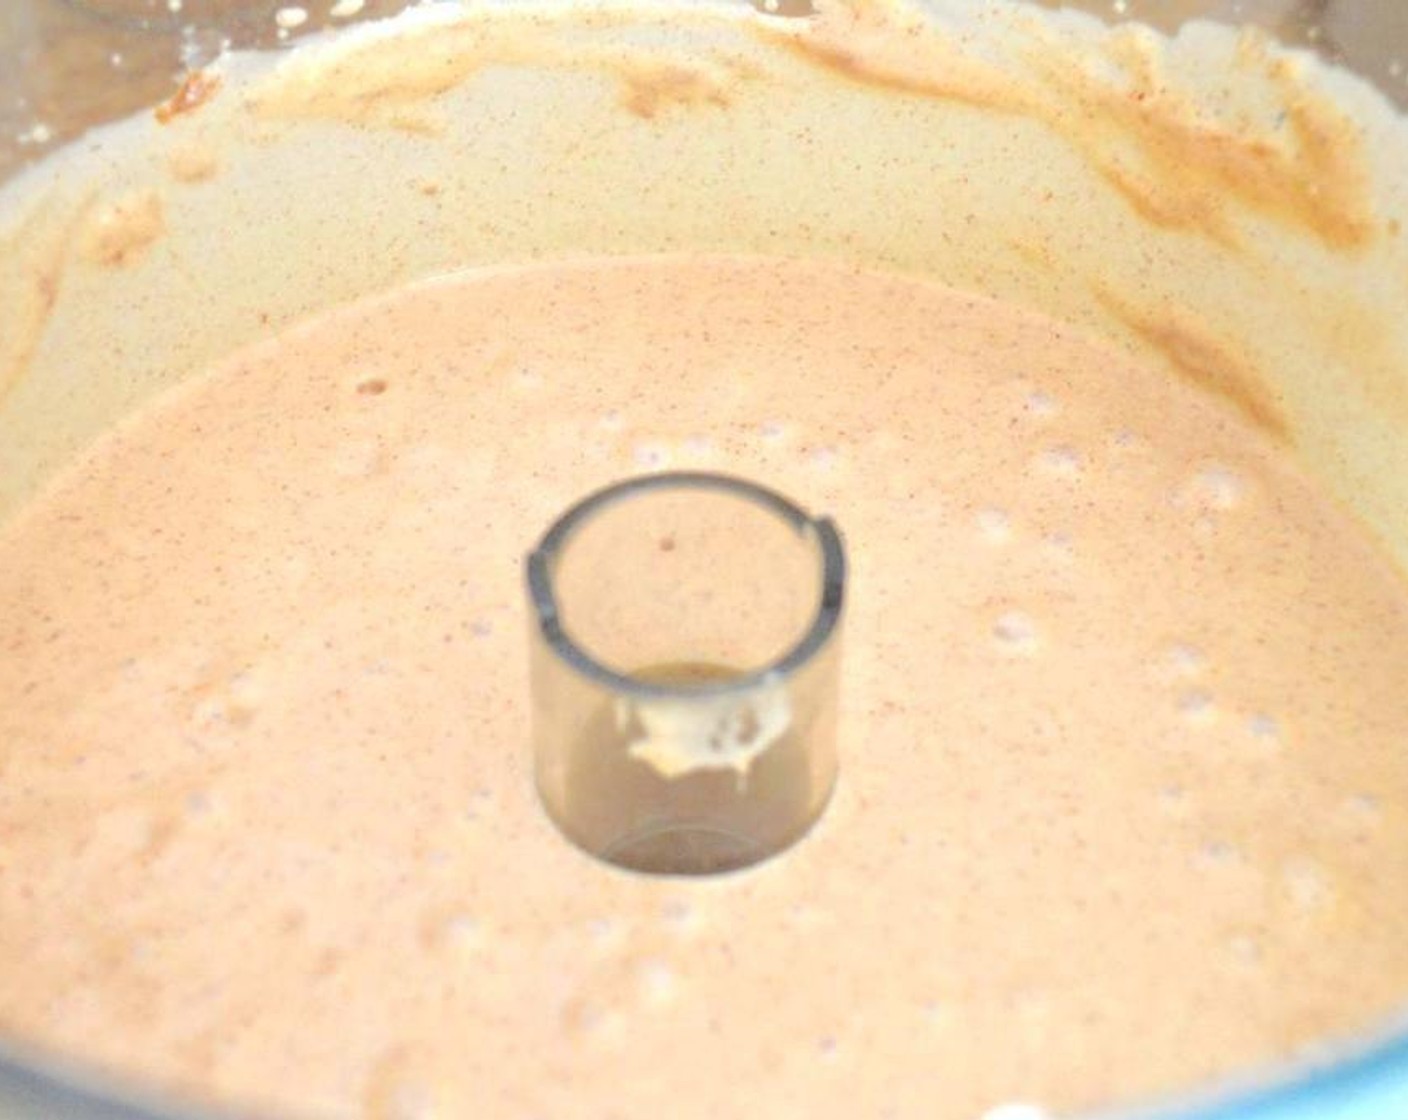 step 1 Set up a food processor and combine Bananas (3), Plain Greek Yogurt (1 cup), Almond Butter (1/2 cup), Ground Cinnamon (1/4 tsp), Honey (1/2 Tbsp) in its bowl. Puree it all until it is creamy and completely smooth.